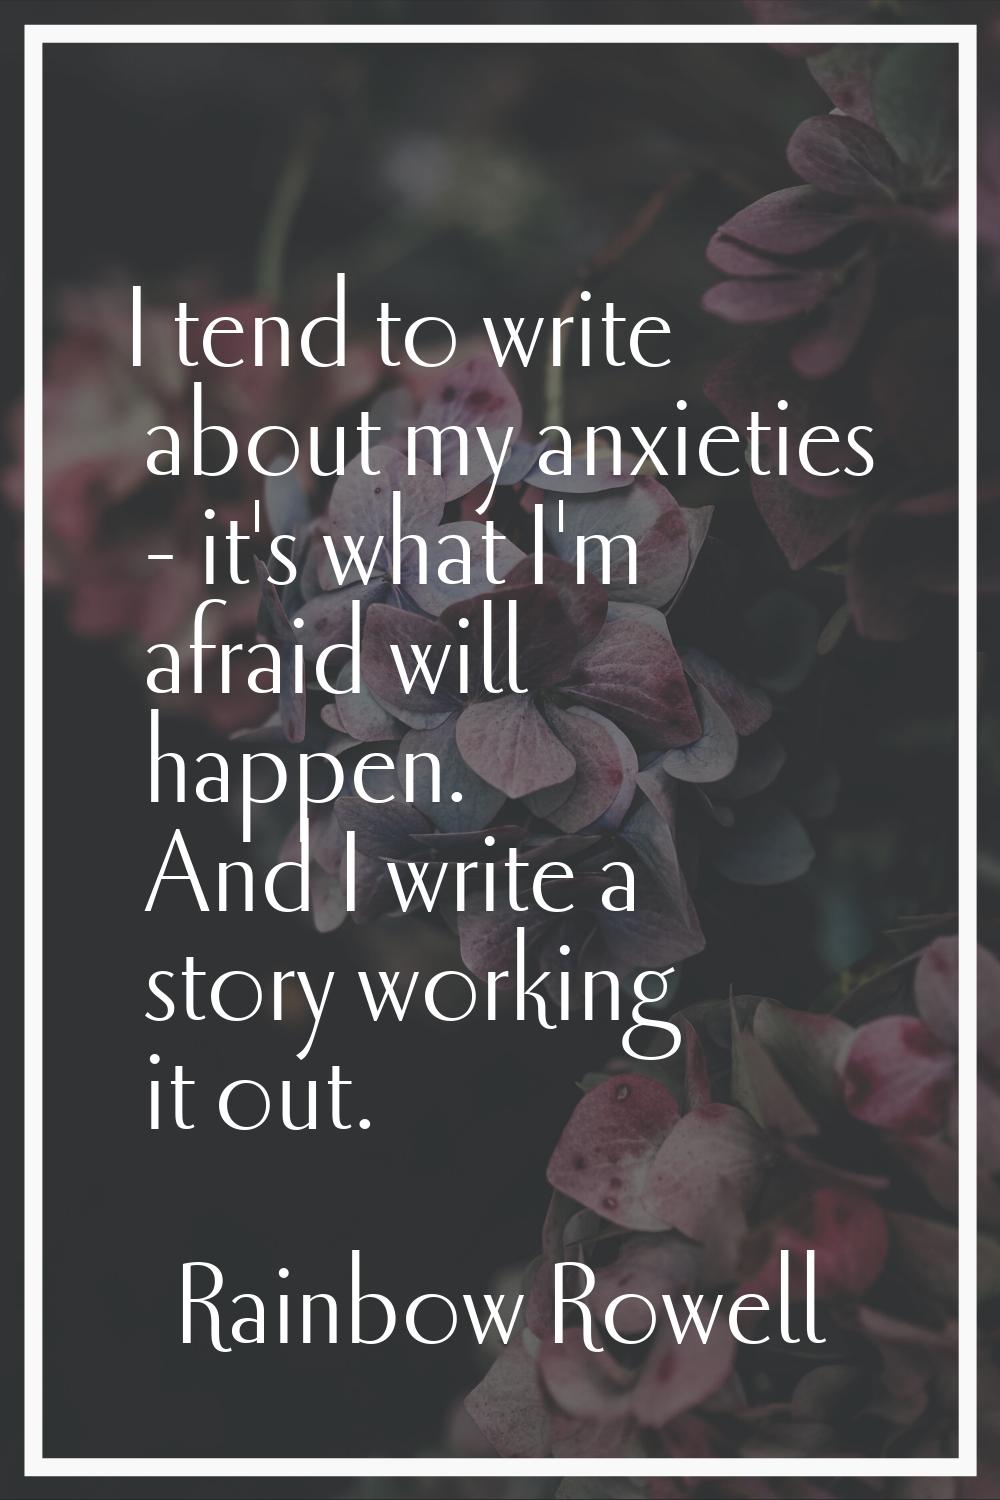 I tend to write about my anxieties - it's what I'm afraid will happen. And I write a story working 